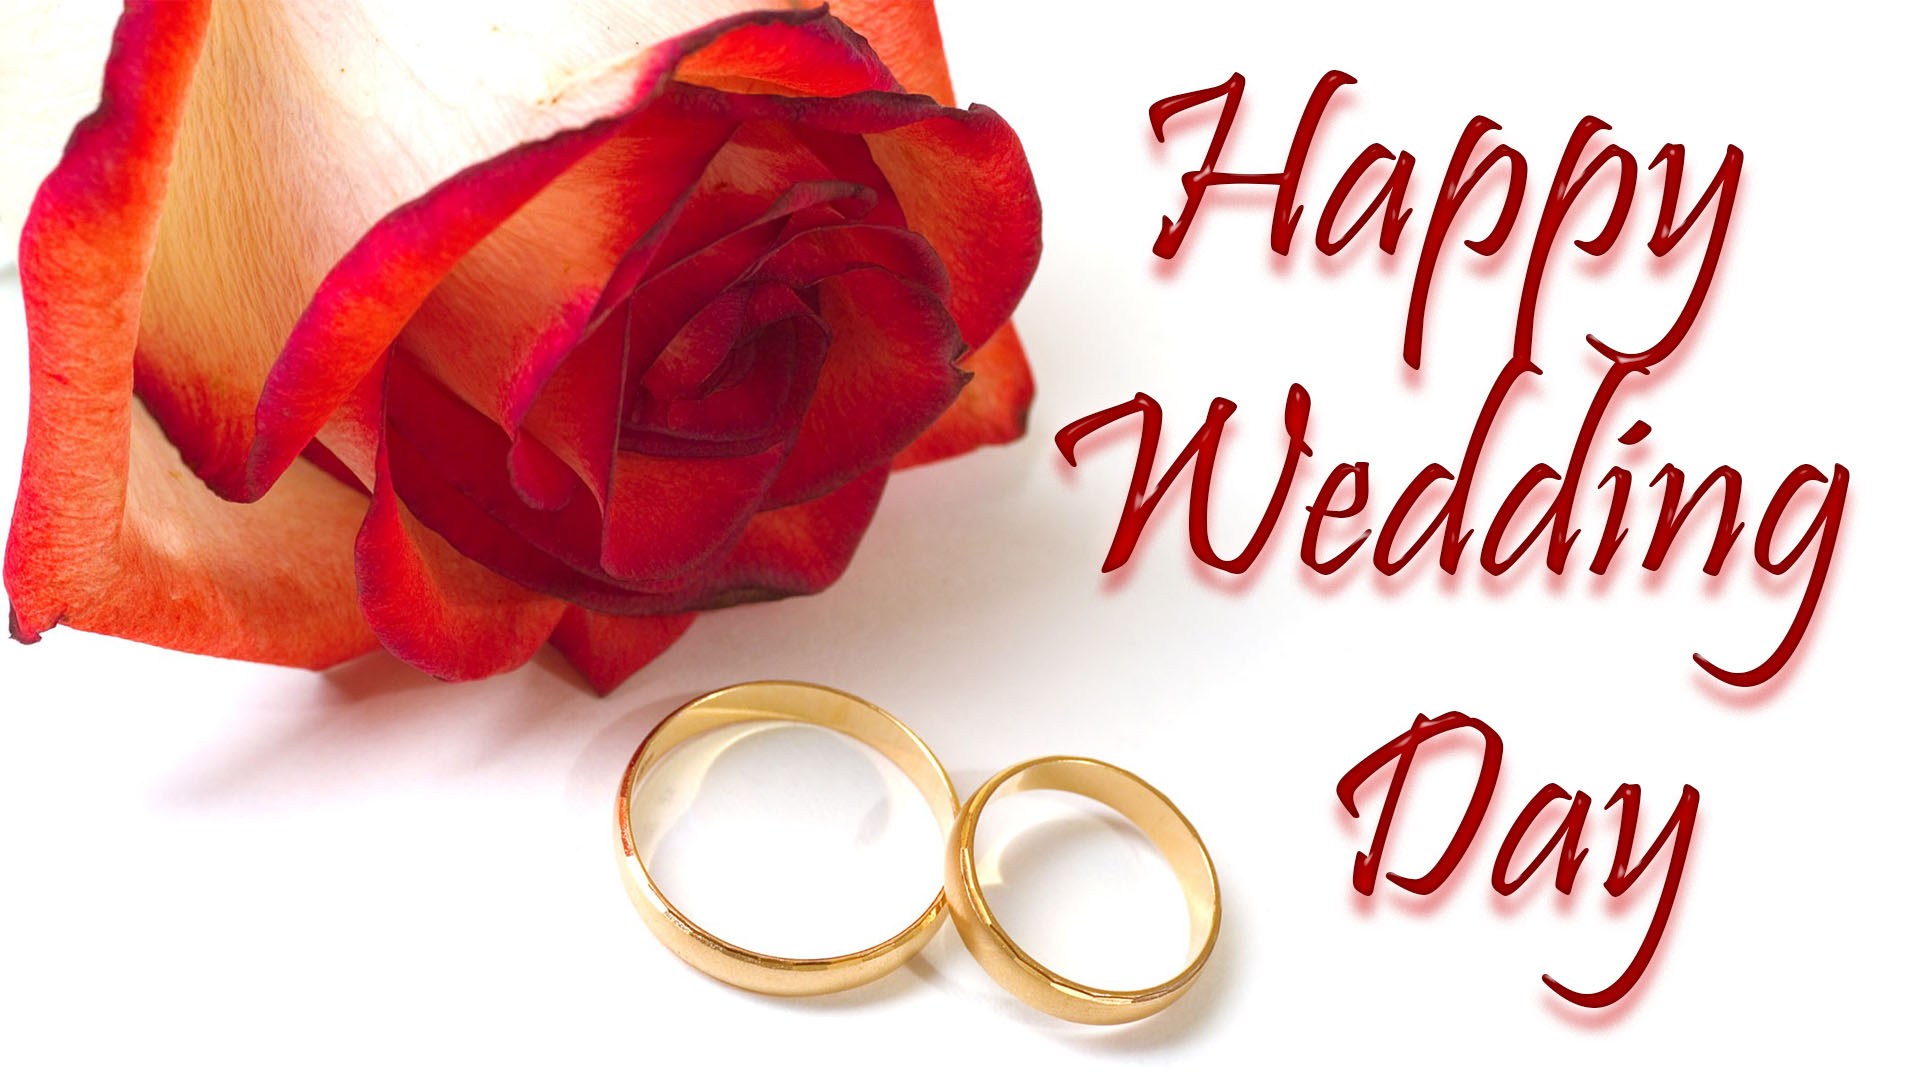 Wedding Day Wishes HD Image Wishes Image HD HD Wallpaper